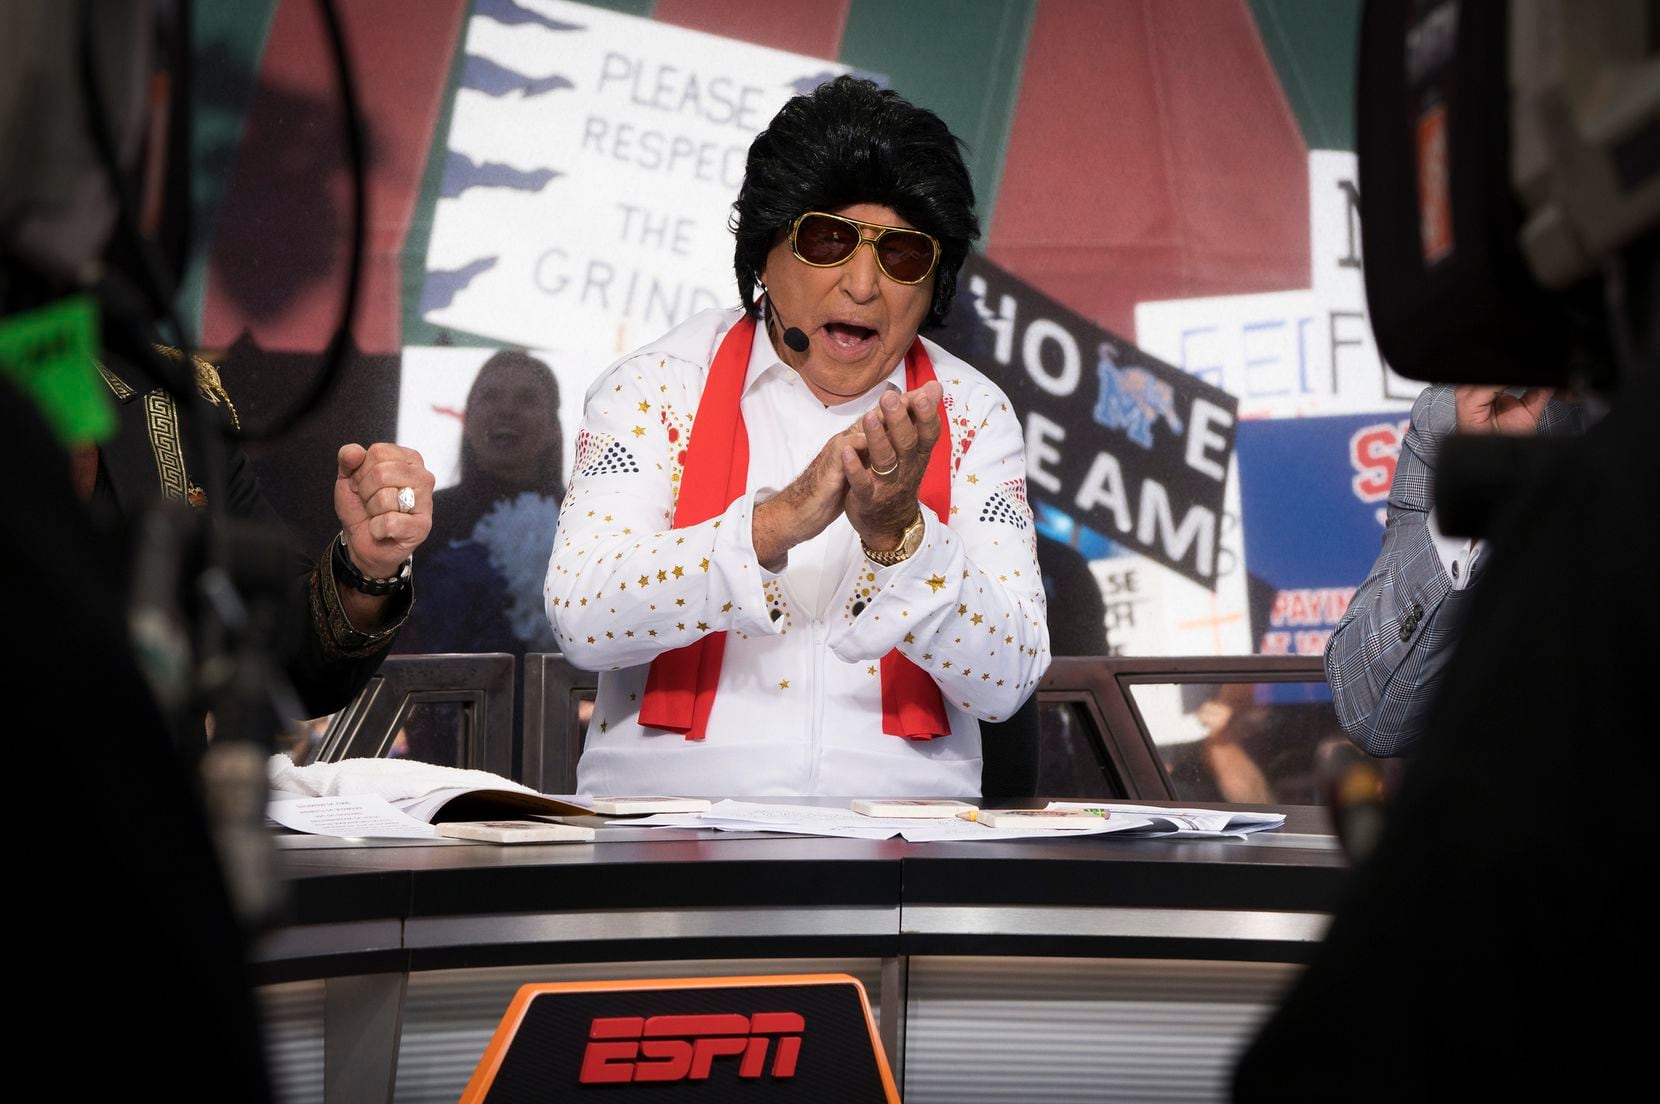 Lee Corso wears an Elvis costume on the set during ESPN College GameDay on Beale Street...